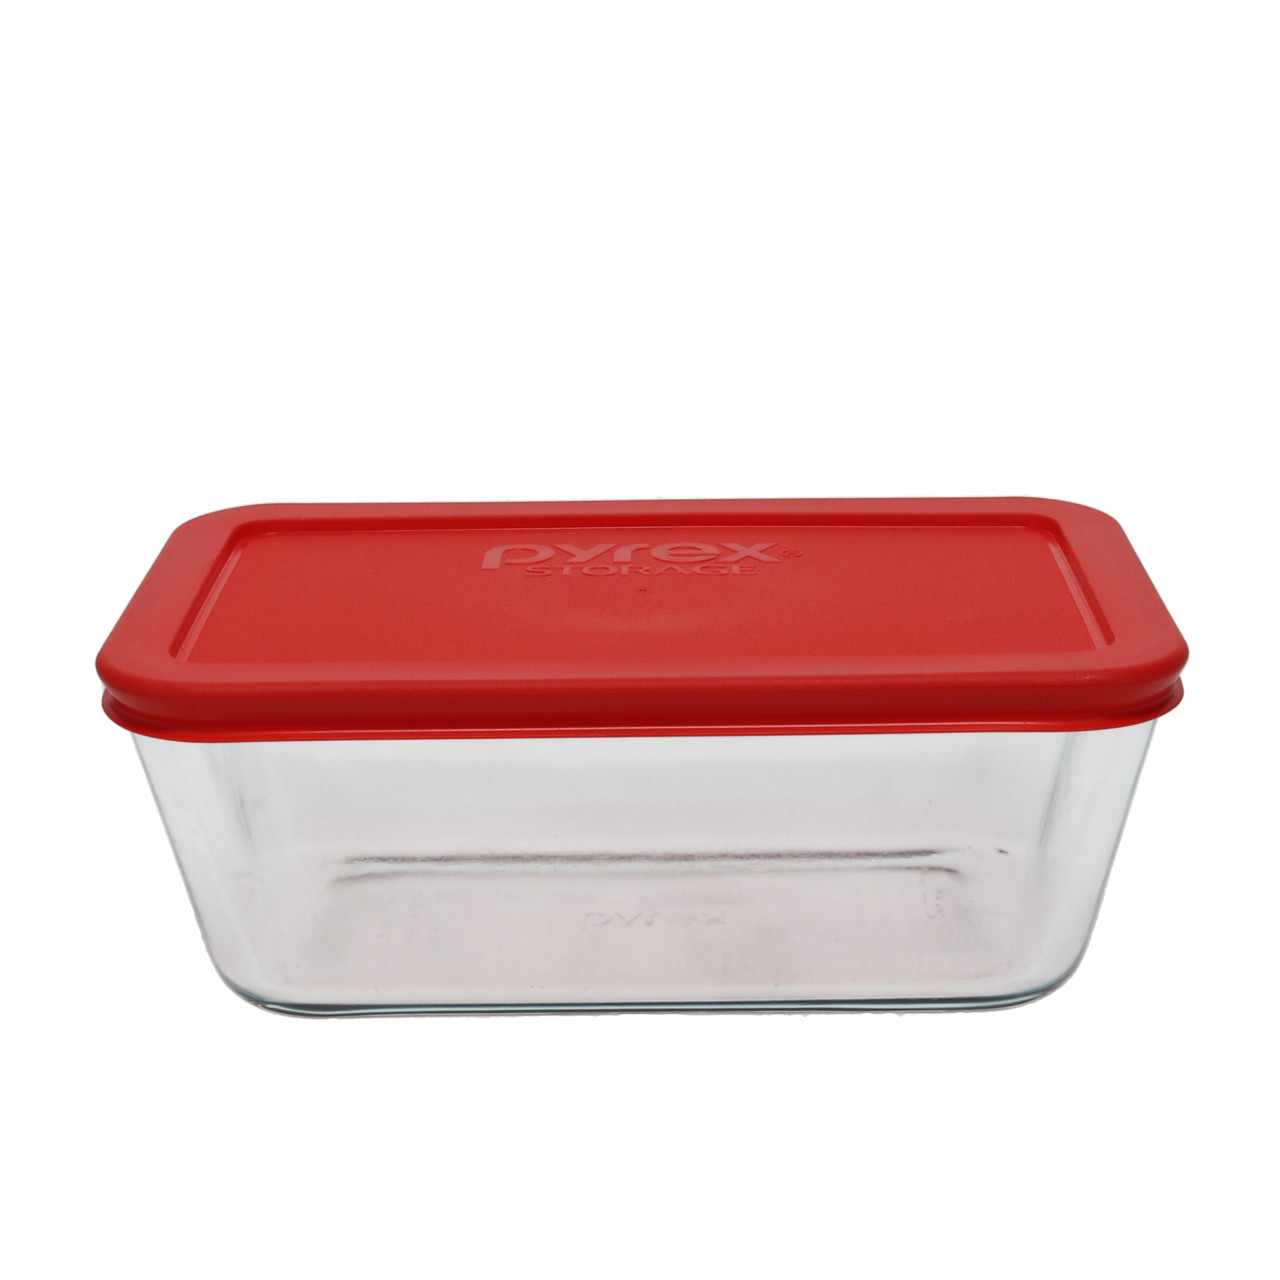 Hermetic lunch box Pyrex Cook & store Red Glass (400 ml) (6 Units) -  NAcloset